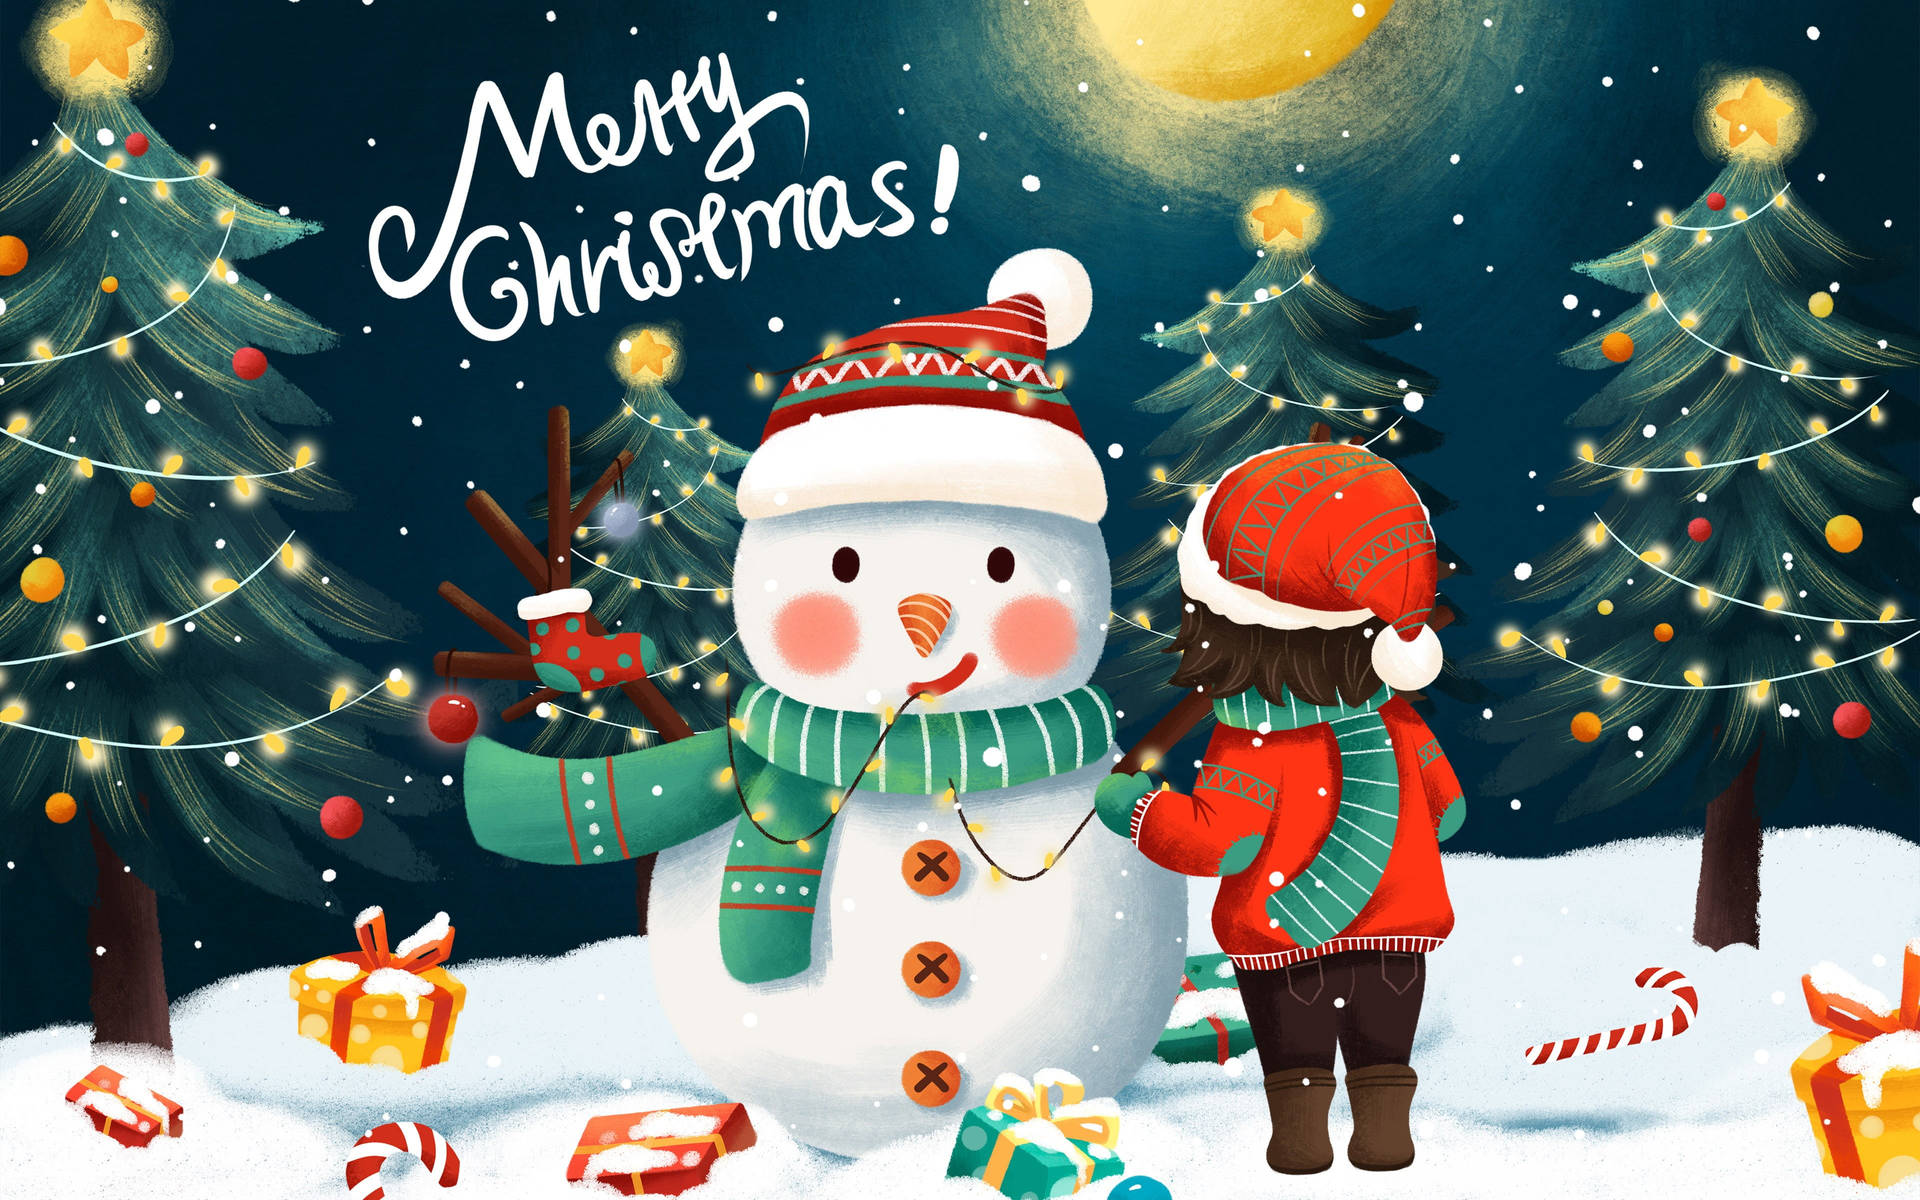 Cute Merry Christmas Snowman With Lights Background